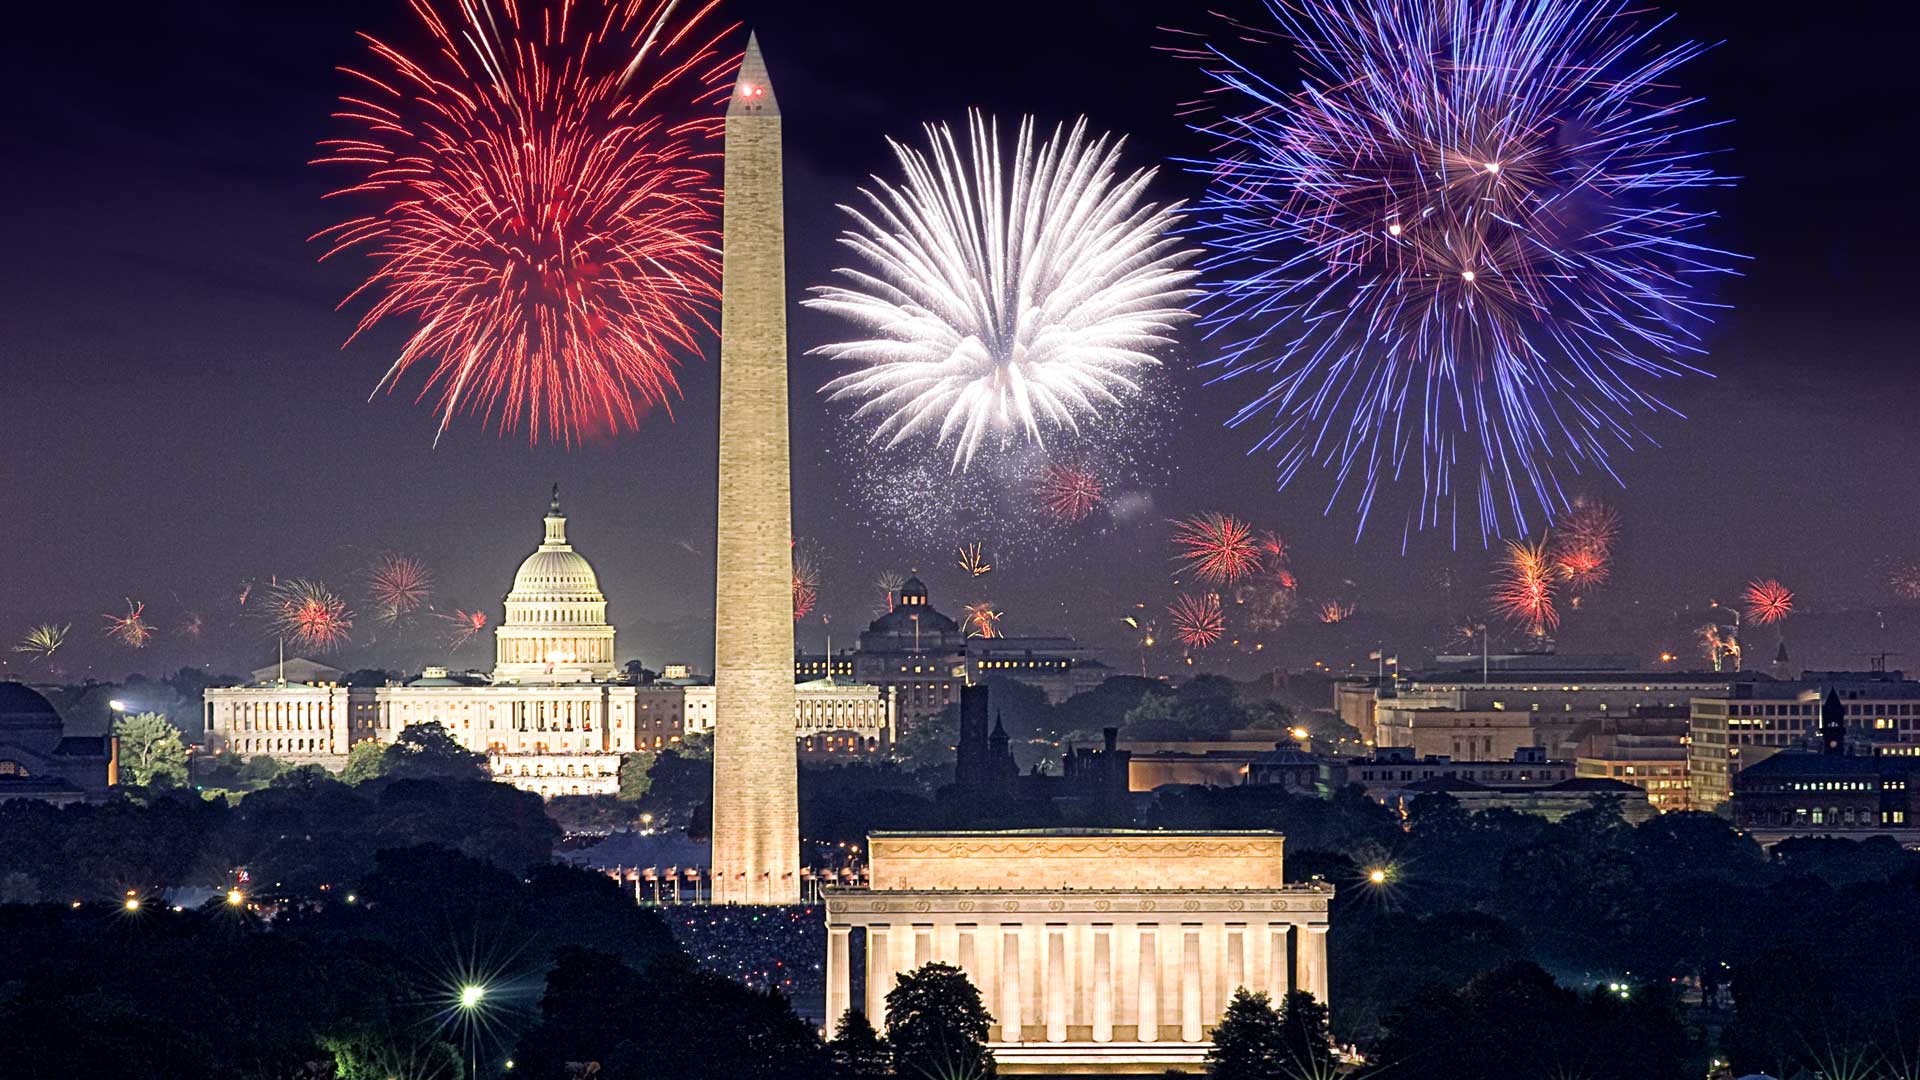 A CAPITOL FOURTH airs live, Thursday, July 4 at 8 p.m. on PBS 6.